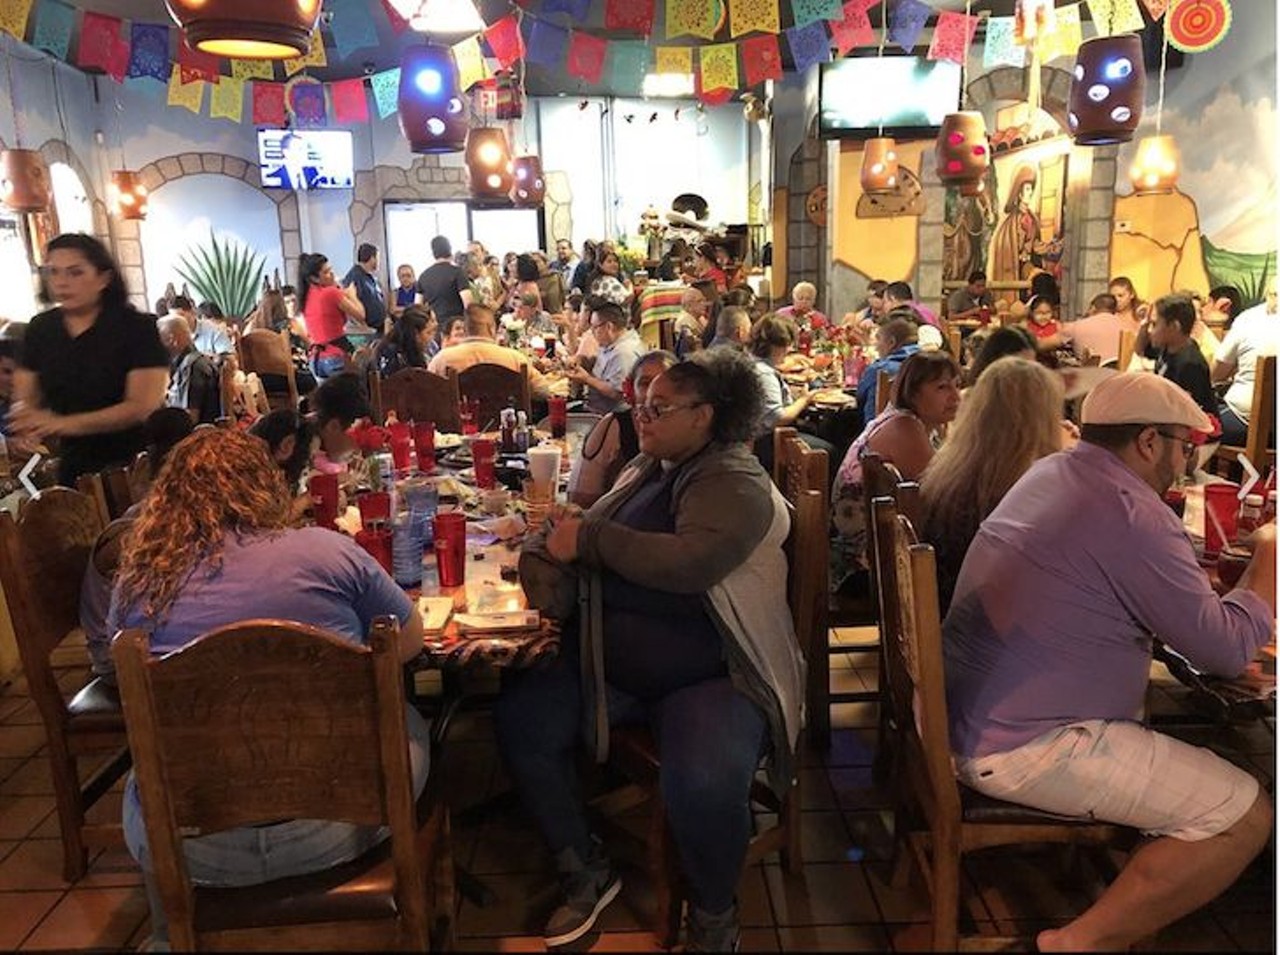 El Tenampa Mexican Restaurant  
4565 W. Irlo Bronson Memorial Highway, Kissimmee, 407-390-1959
Enjoy authentic Mexican food right in Kissimmee. They have everything from grilled pork to ceviche to vegetarian options. Make sure to stay for the flan or fried ice cream. 
Photo via Yelp/Lora G.